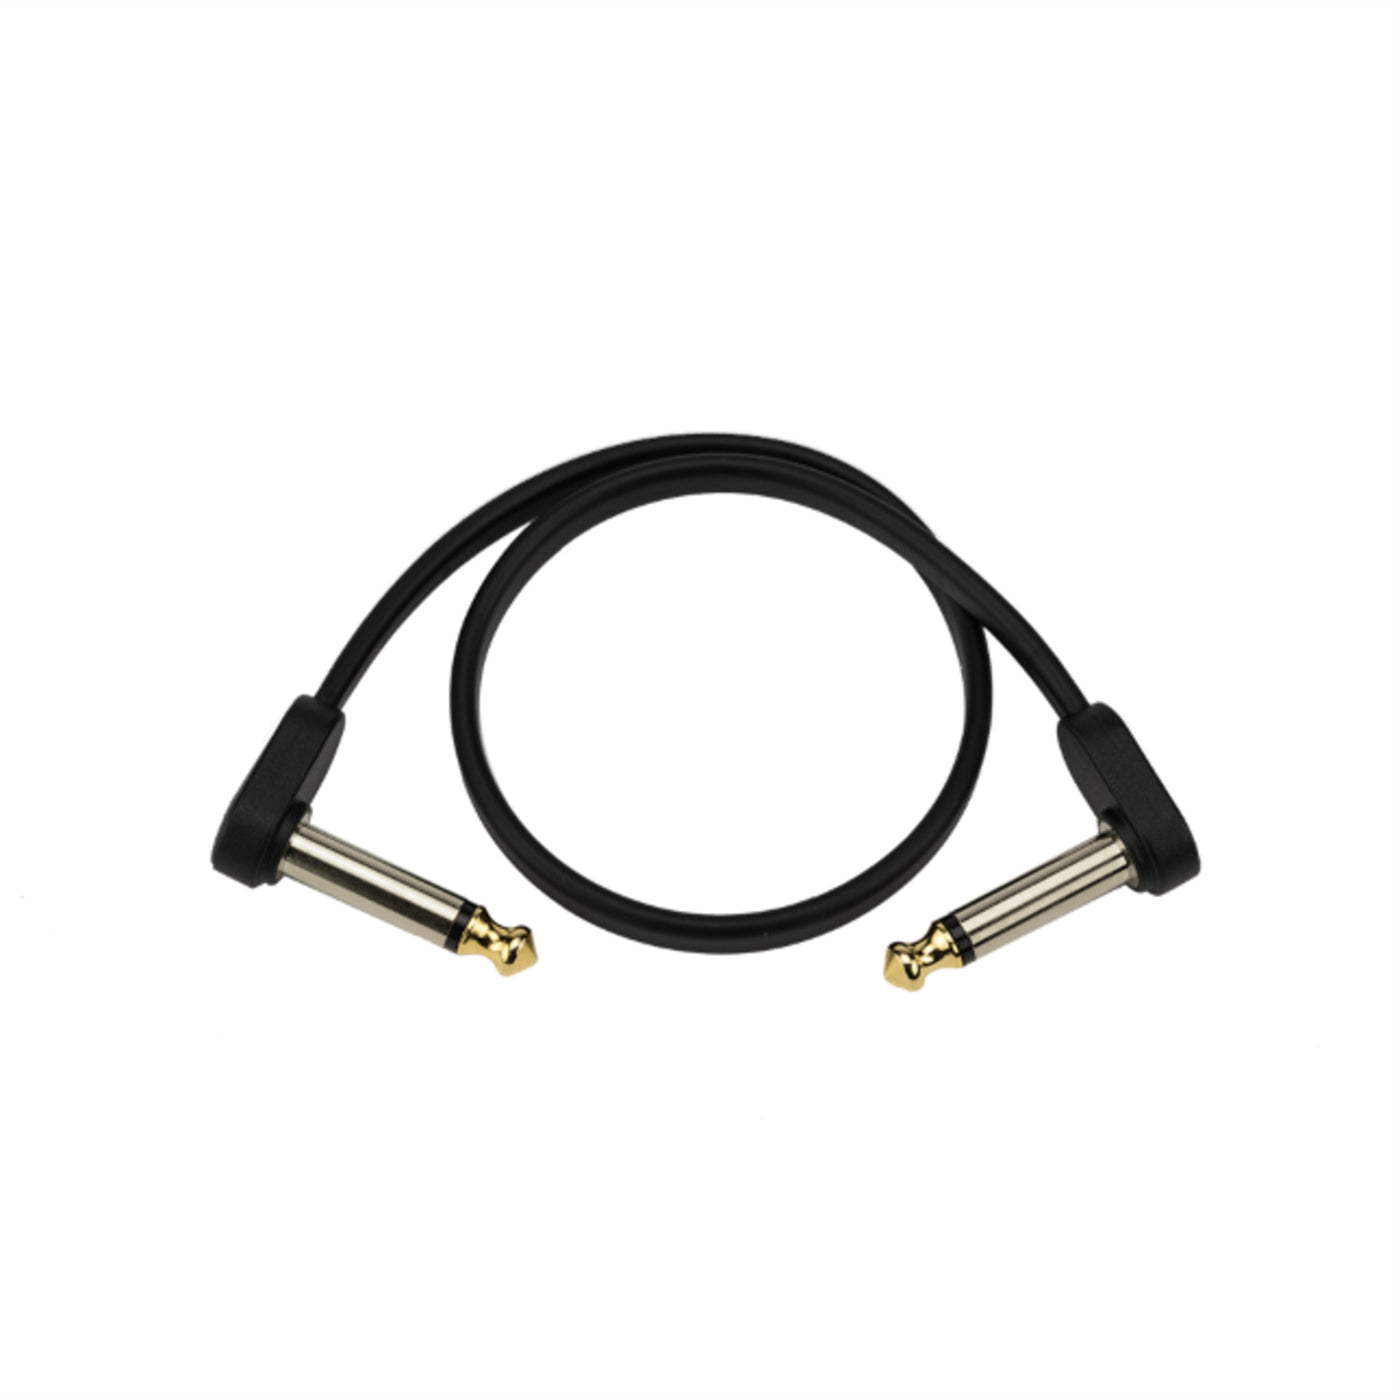 D'Addario Flat Patch Cable, 4-Inch Offset Right Angle, Twin Pack (PW-FPRR-204OS)